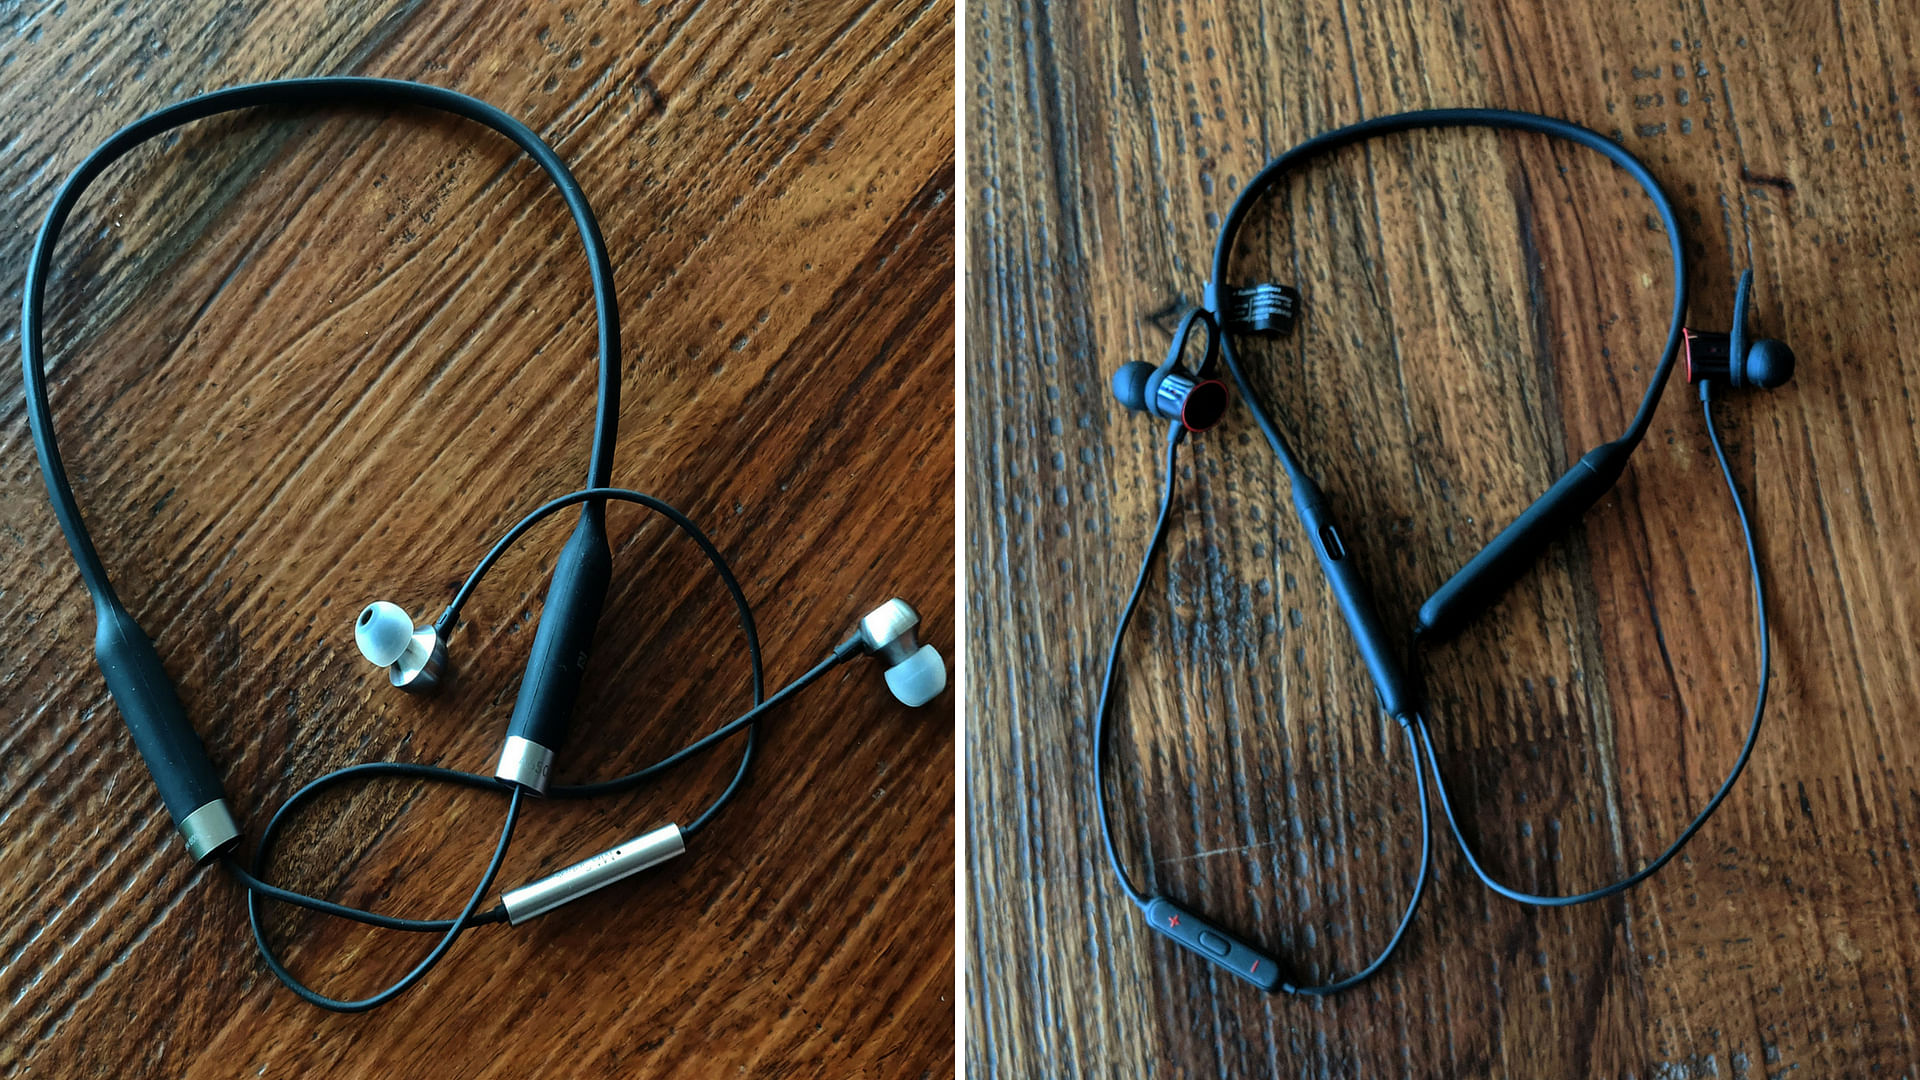 OnePlus Bullets Wireless (right) and RHA MA650 (left)